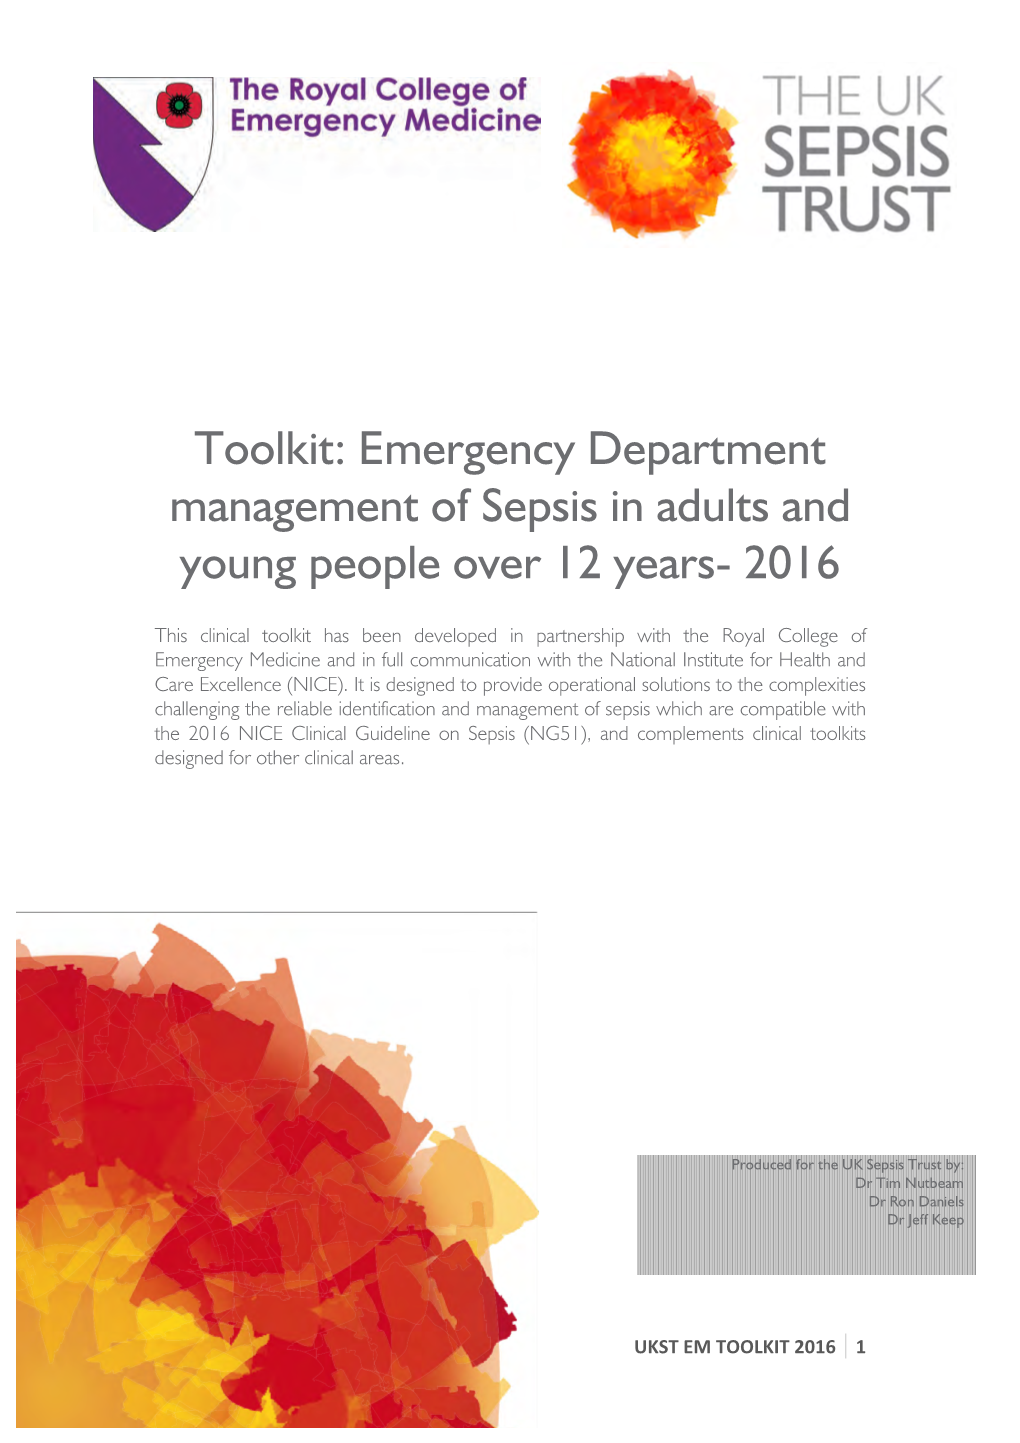 Toolkit: Emergency Department Management of Sepsis in Adults and Young People Over 12 Years- 2016